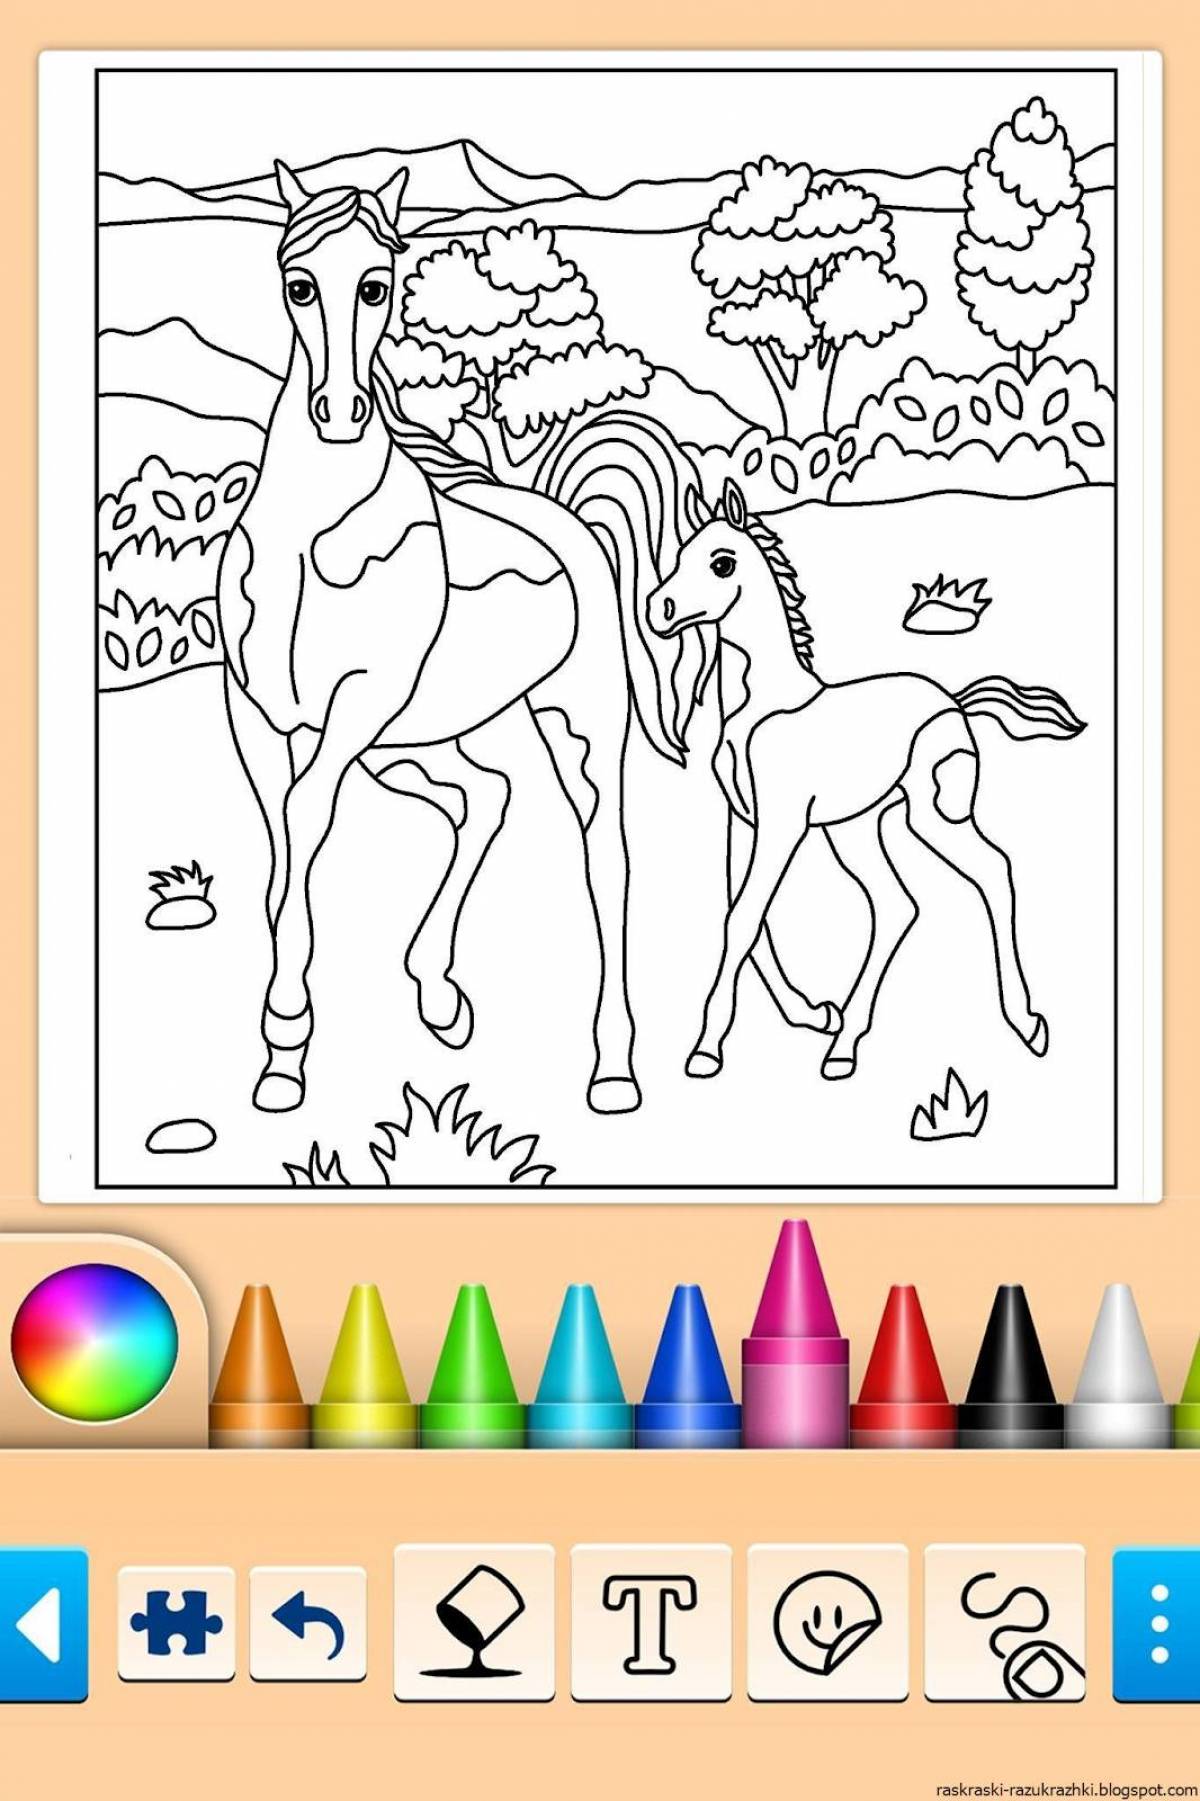 Amazing coloring games for girls